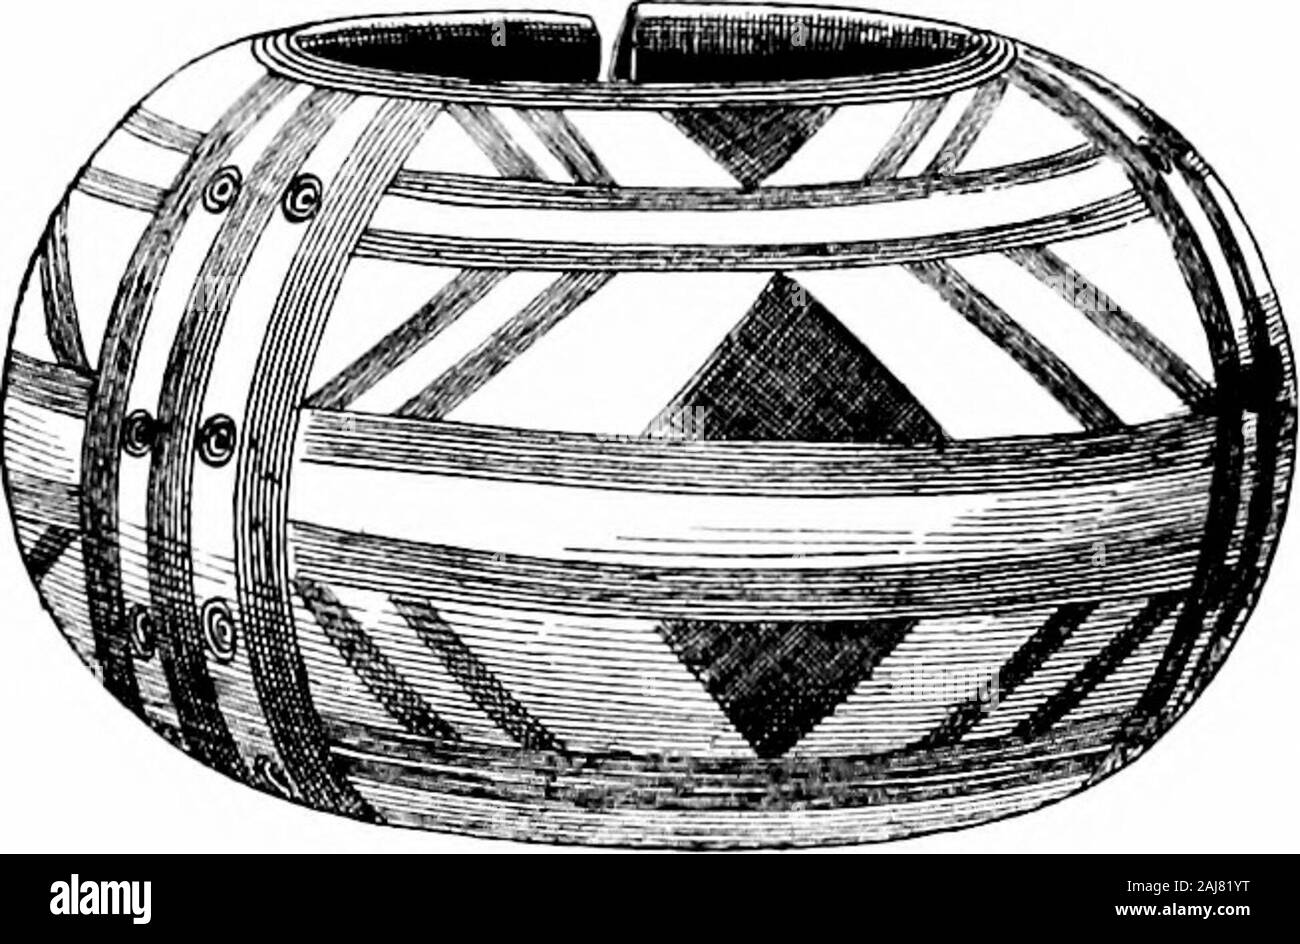 A guide to the antiquities of the bronze age in the Department of British and mediæval antiquities . Fig. 101.—Halbert, Trieplatz,Potsdam, Prussia. J 100 DESCRIPTION OF CASE G ?with very high feet, one of which was painted with semicirclesand spirals in red and yellow. The presence of the spiral in-dicates Aegean influence, which cannot be earlier than the periodbetween 3000-2500 B.C., when this ornament was first used inthe Greek Islands. Within these approximate limits the inhabit-ants of the Danube val-ley probably became ac-quainted with metals,either by independentinvention or instruction Stock Photo